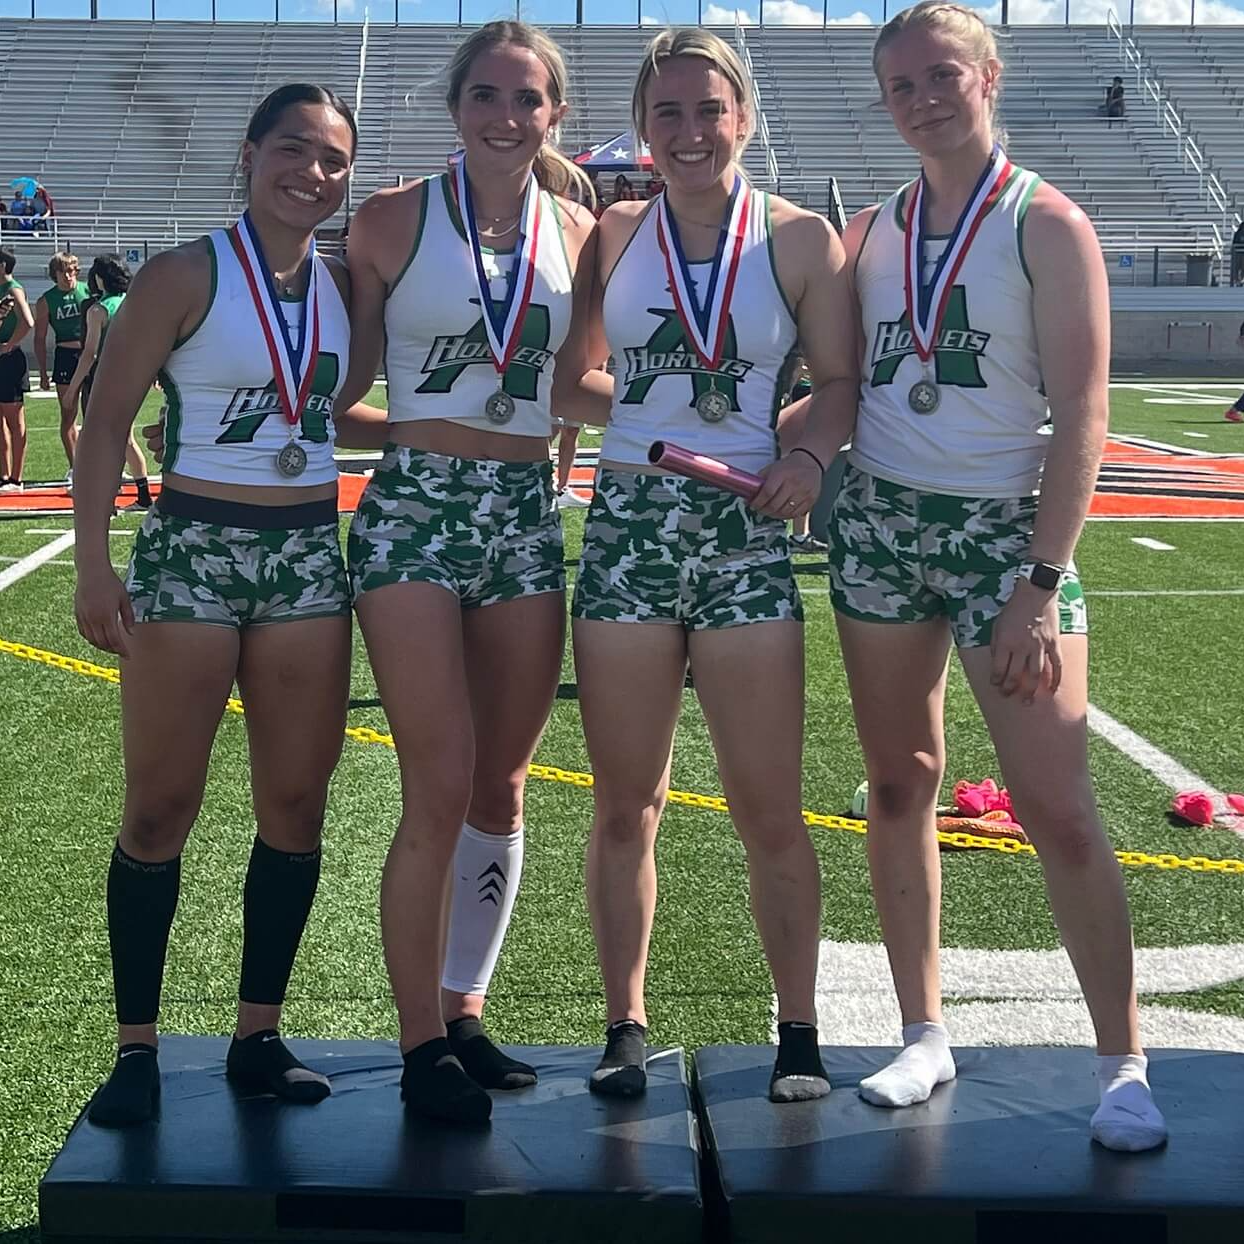 4 girls wearing track uniforms and medals